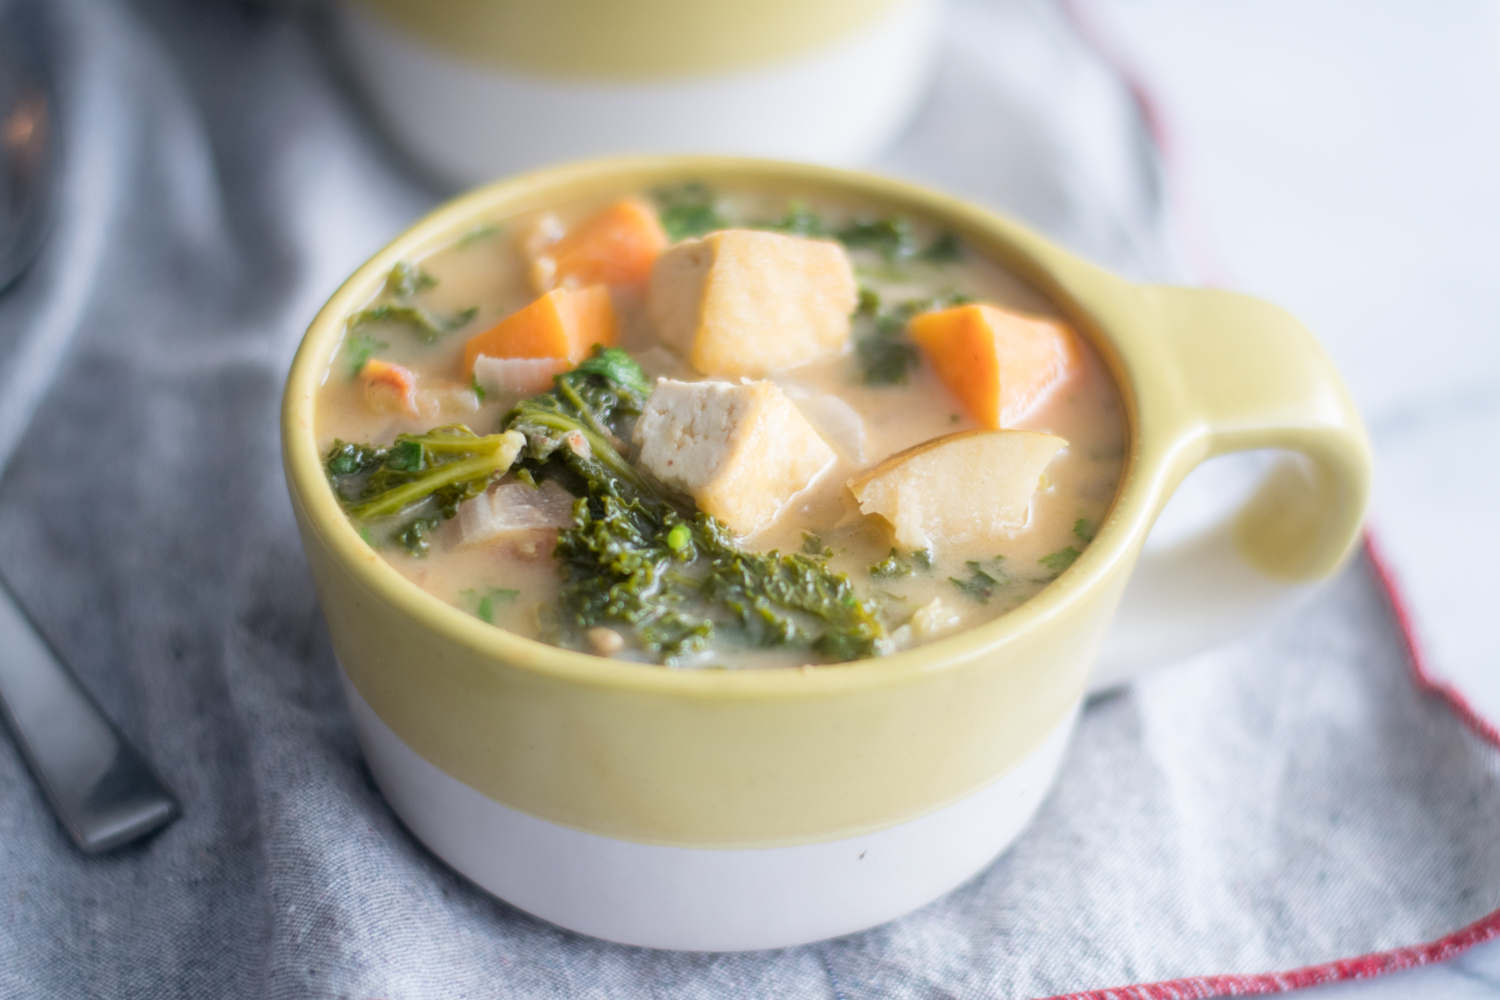 Tofu Sweet Potato and Almond Butter Stew with kale is a healthy and nutritious stew.  #vegan #stew